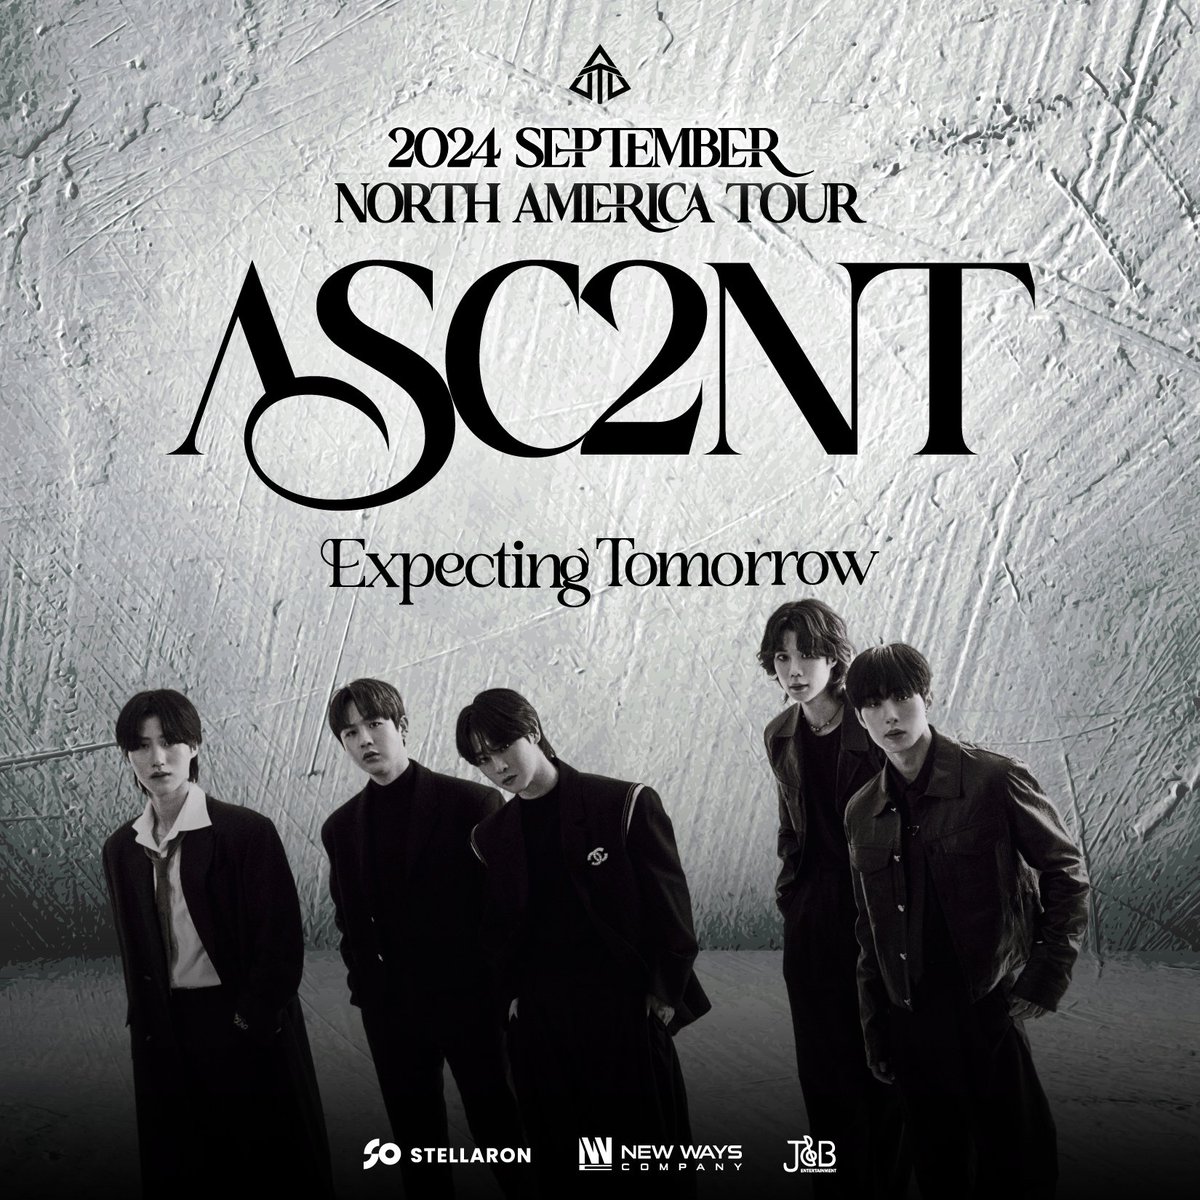 📣Official Announcement 2024 ASC2NT [EXPECITING TOMORROW] IN NORTH AMERICA TOUR 🎊 2024 September 🎉 youtu.be/WNIlayN14Sc?si… More information coming soon STAY TUNED~!! 🌐 JNBCANADA.COM #ASC2NT #JNBCANADA